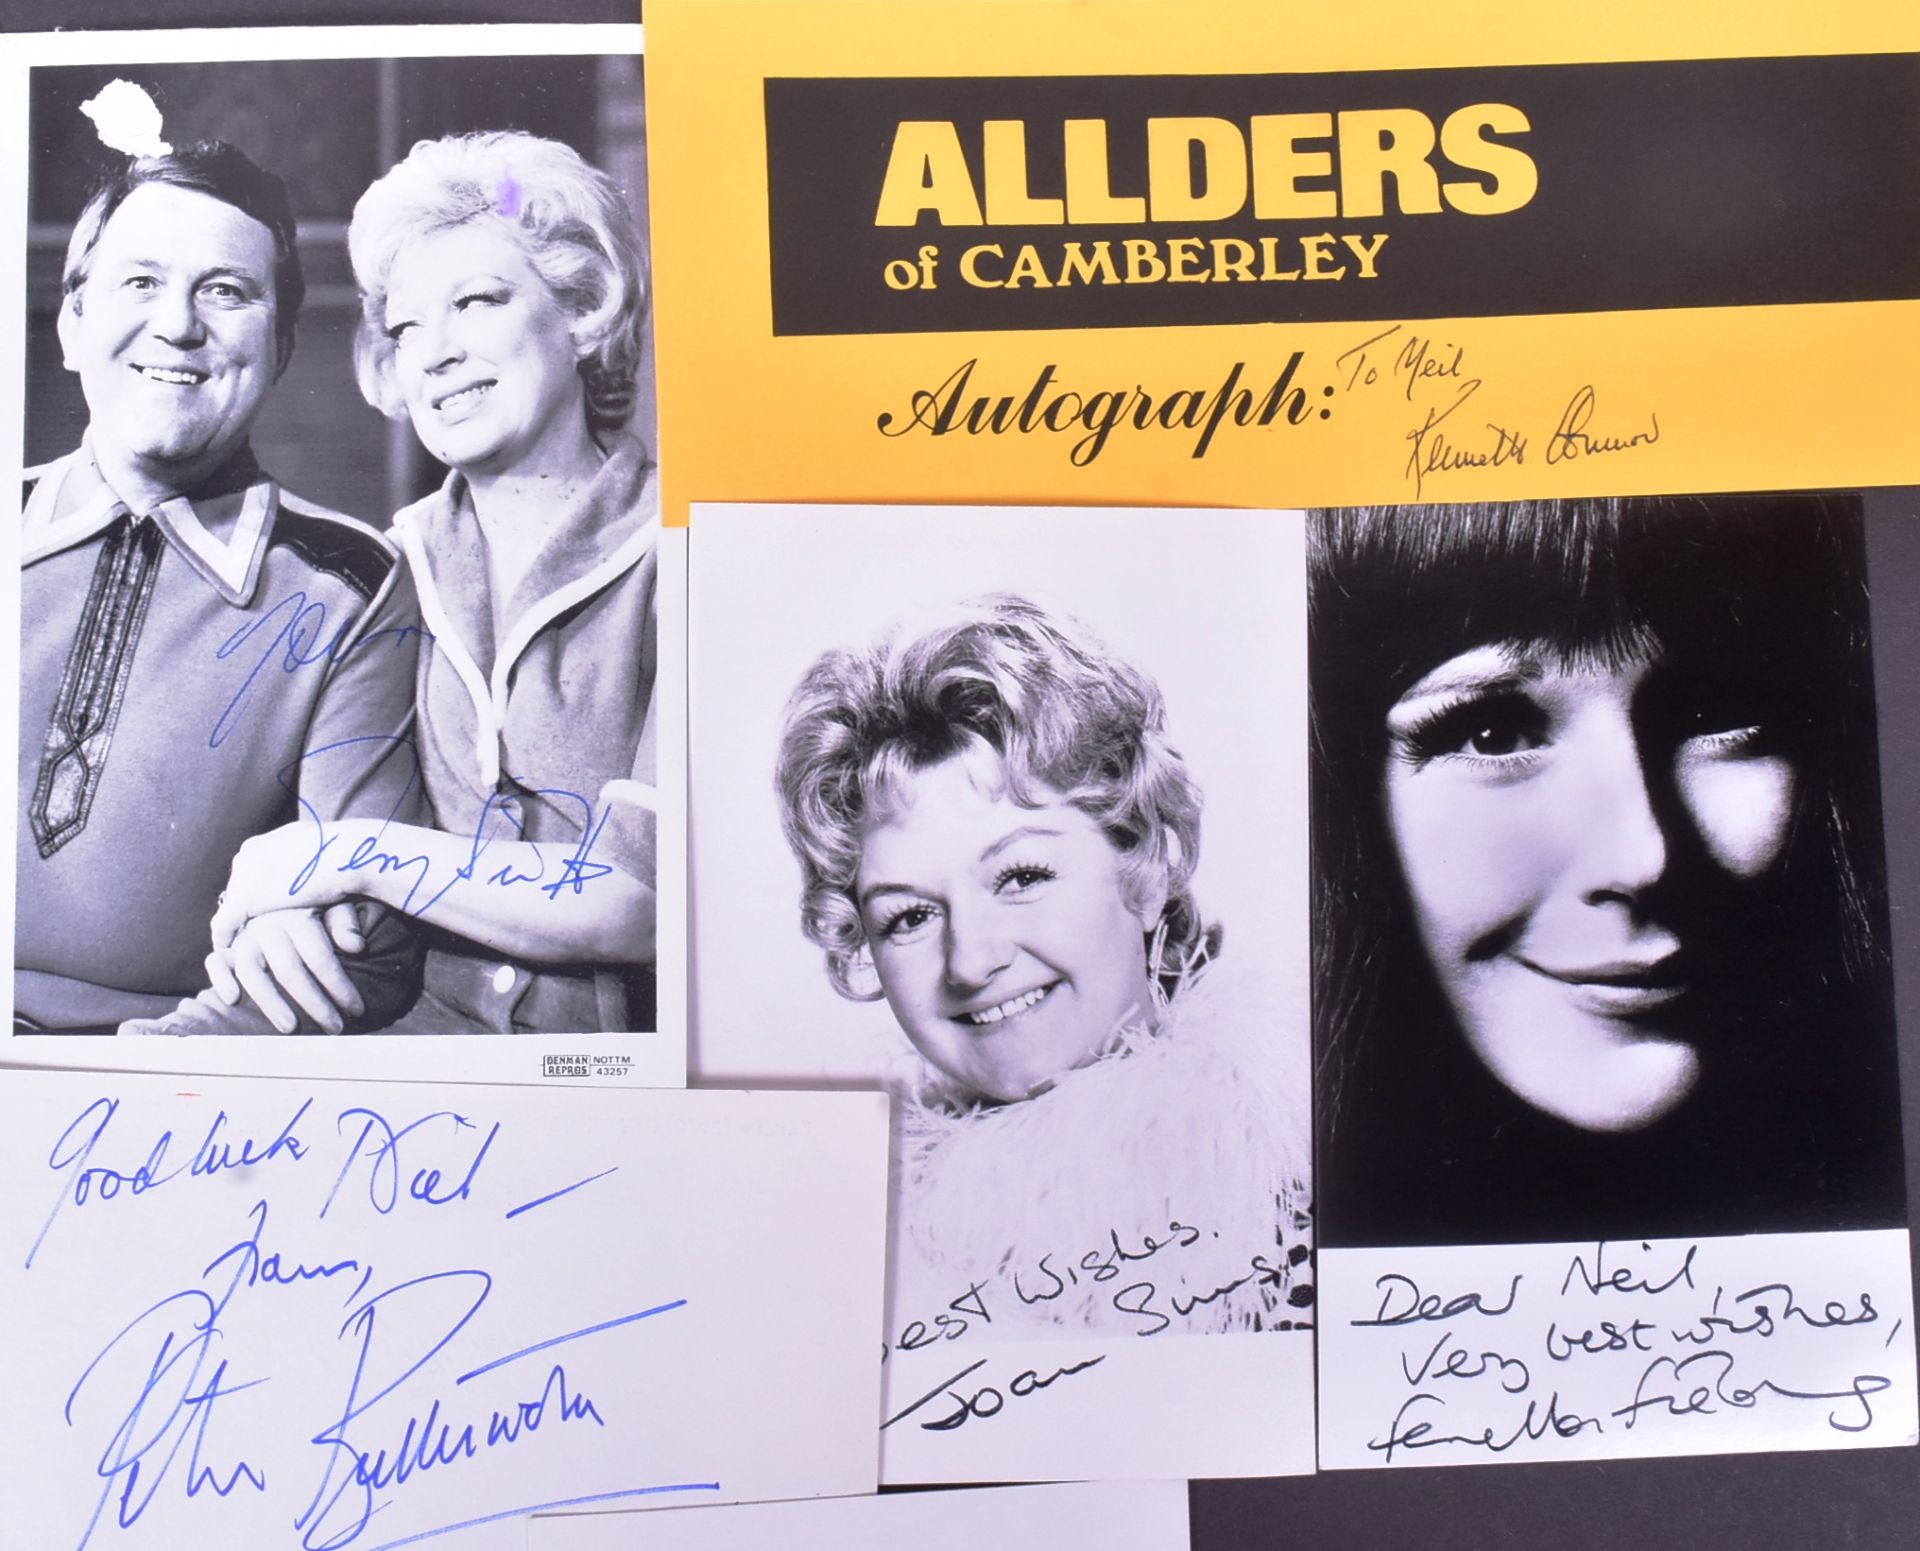 CARRY ON - CAST MEMBER AUTOGRAPHS - Image 4 of 4